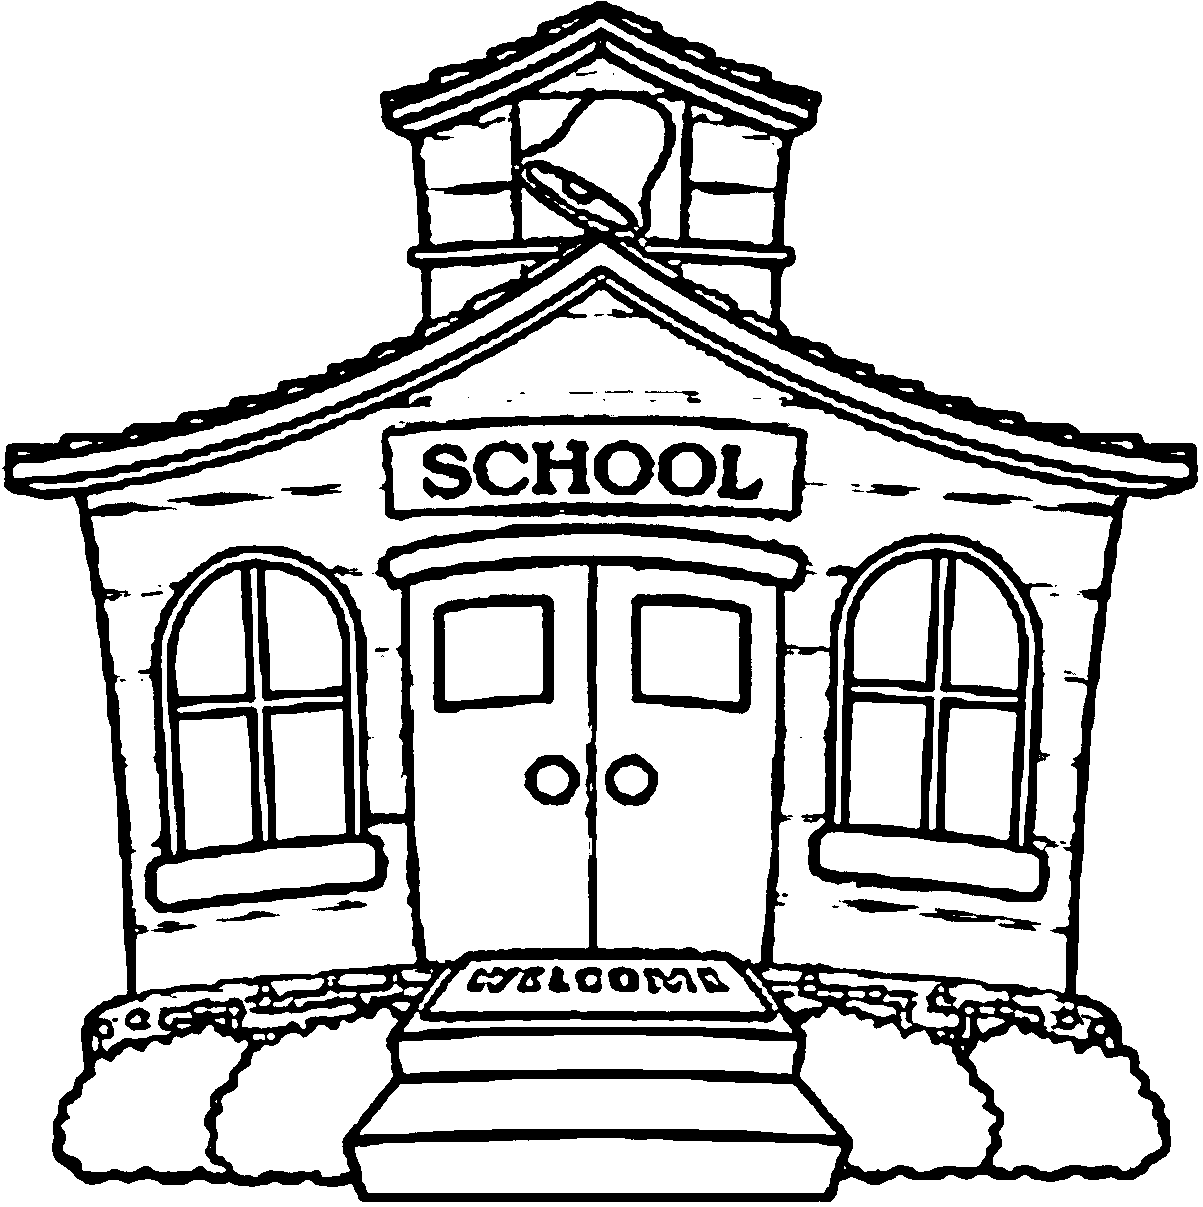 schoolhouse clipart conference